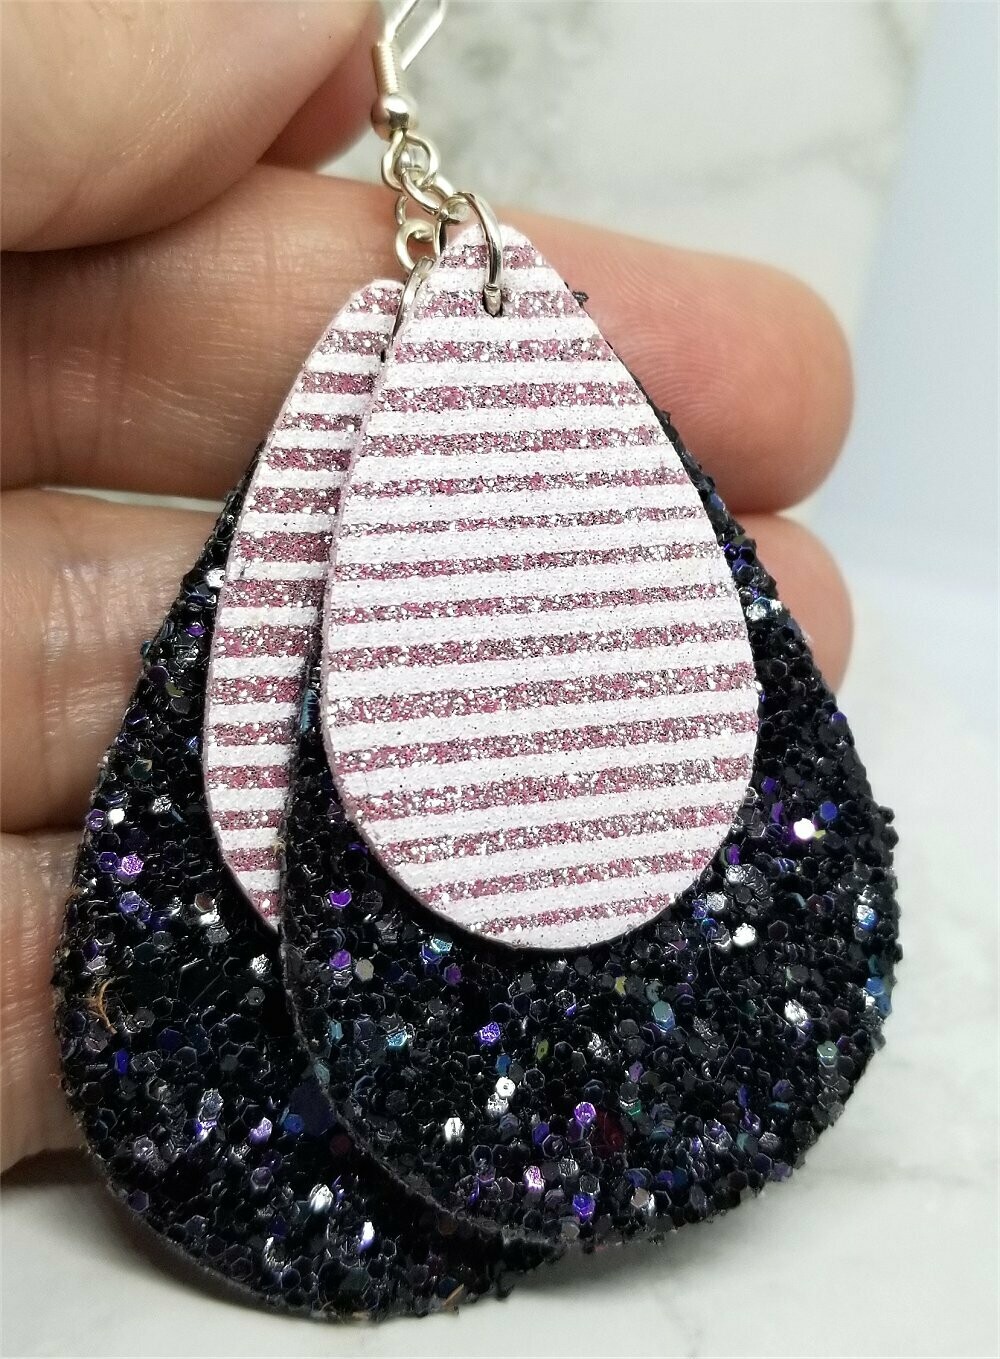 Black and Purple Glitter Very Sparkly Double Sided FAUX Leather Teardrops with Metallic Rose Gold Striped FAUX Leather Teardrop Overlay Earrings